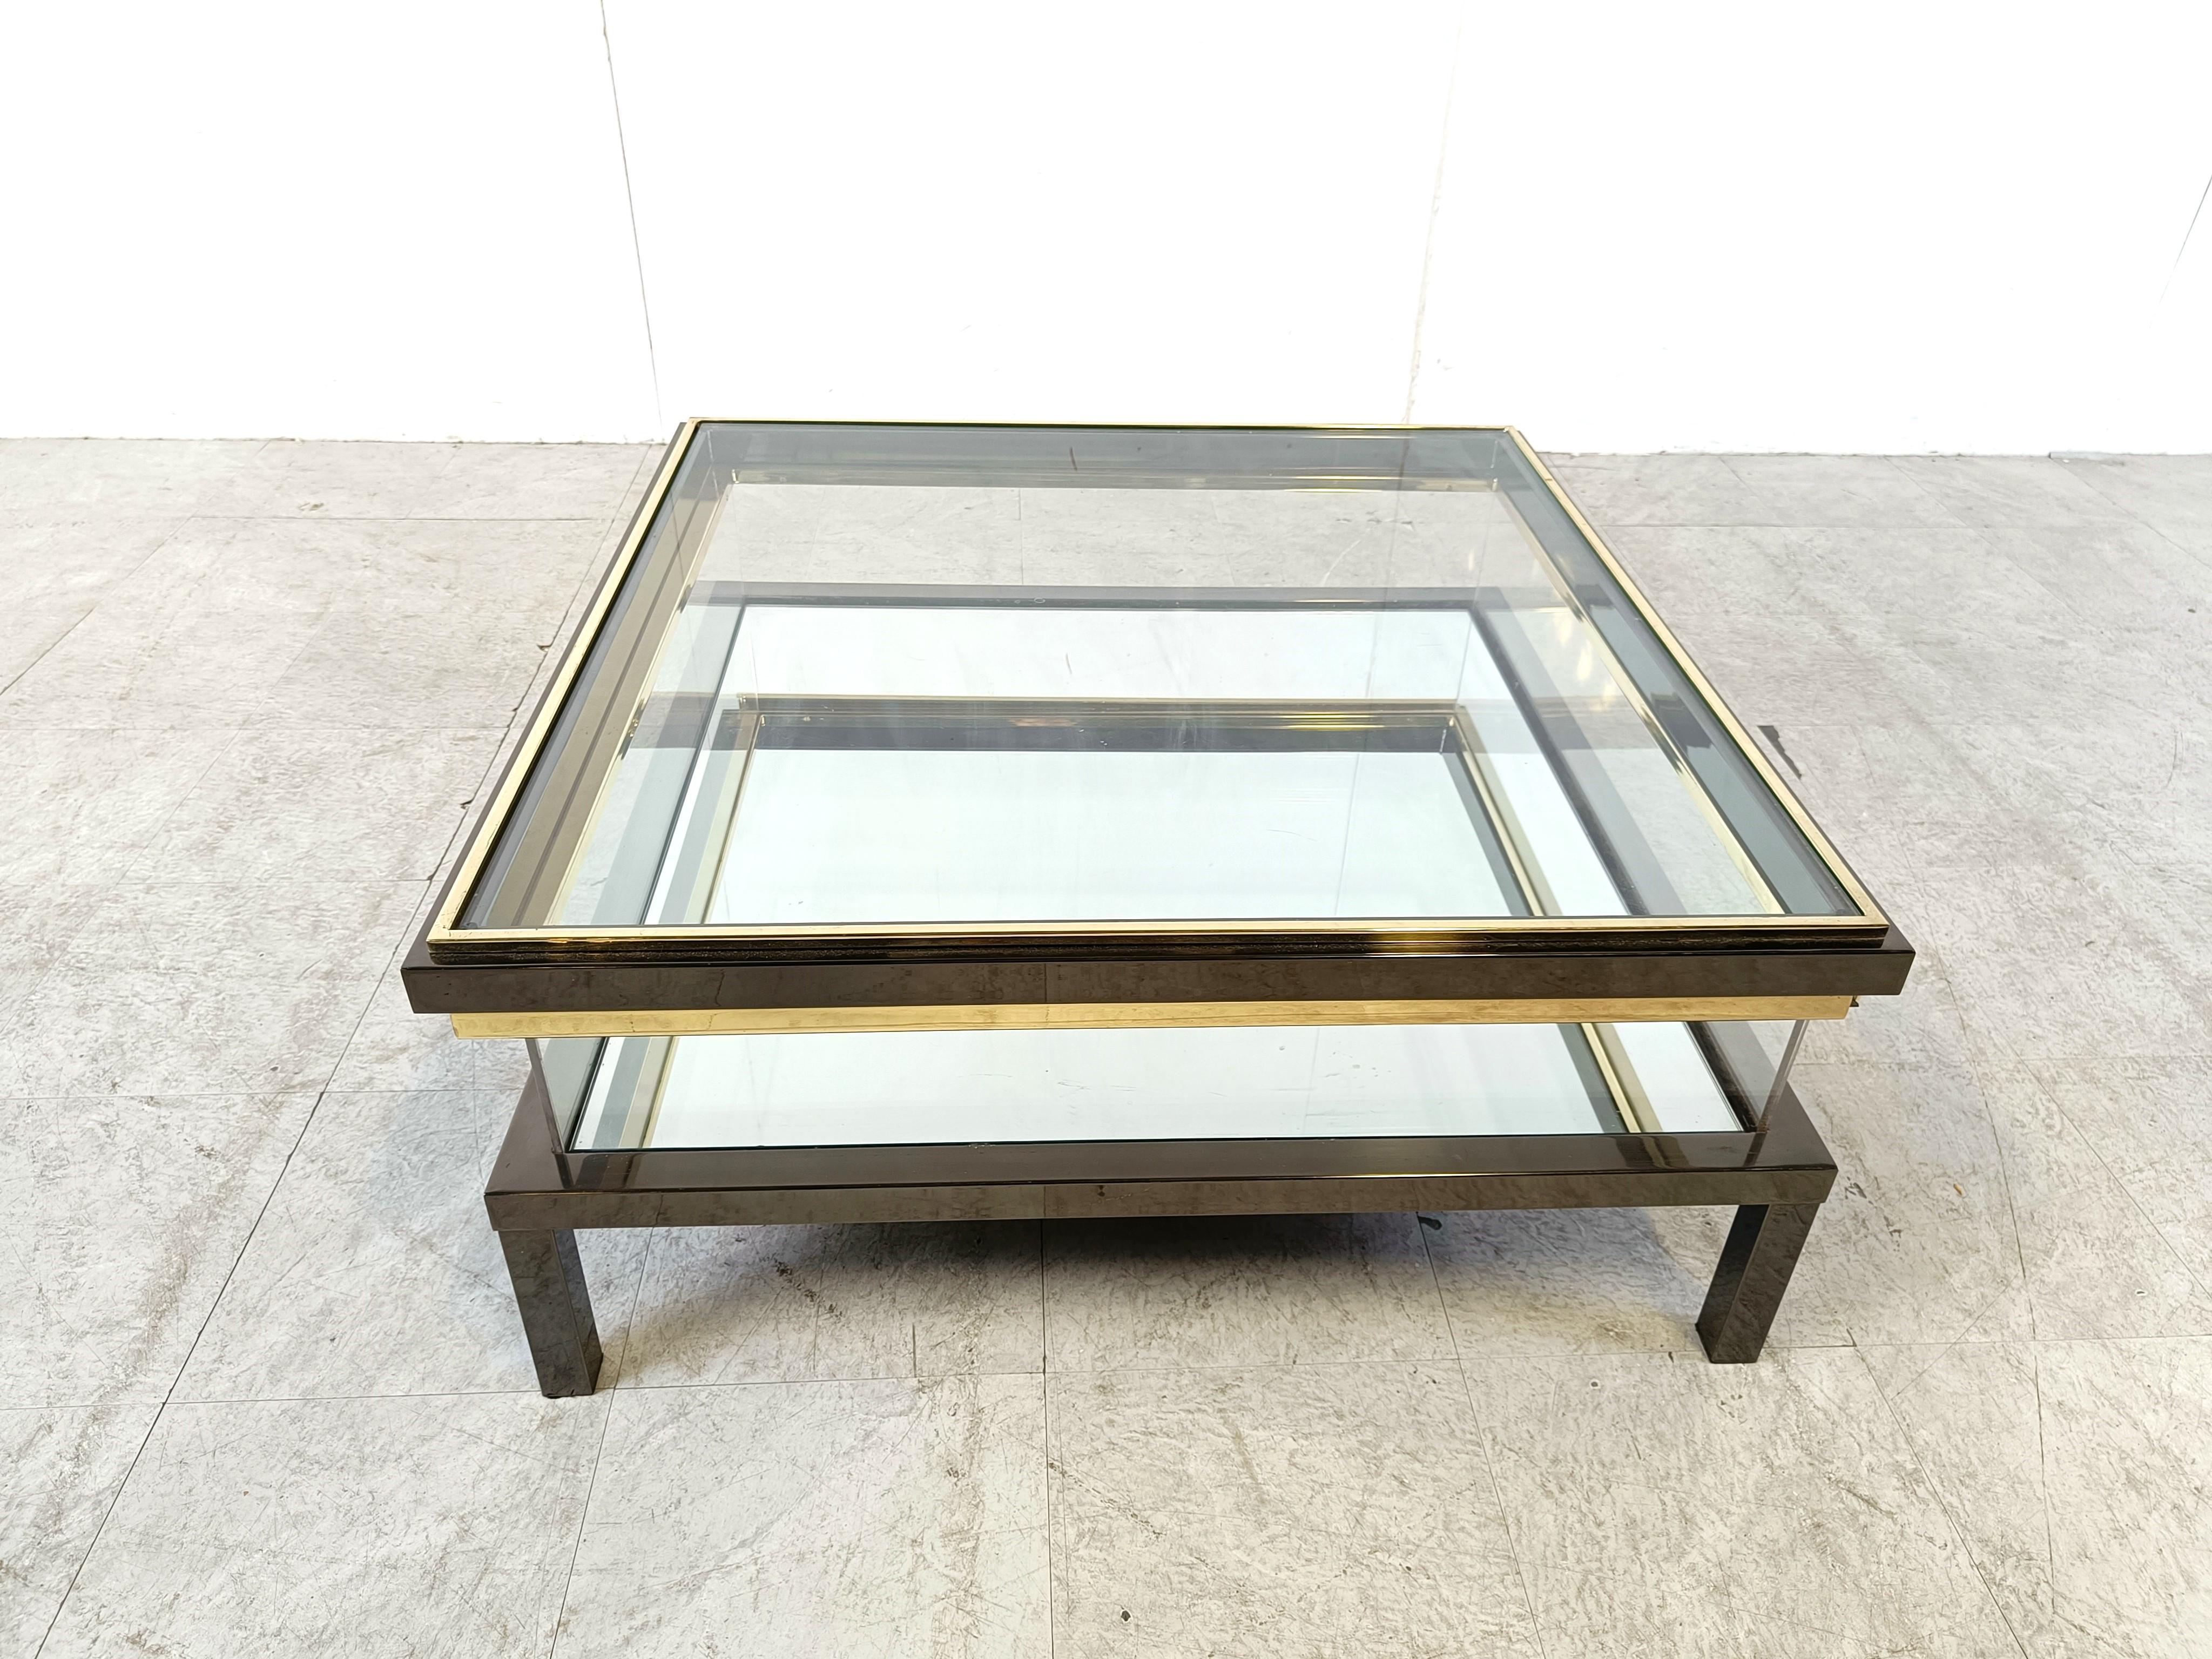 Vintage display coffee table with a sliding glass top.

This luxurious coffee table is made from heavy quality polished steel, brass and glass.

You can choose to either have it with the mirrored glass or leave it out  to reveal a storage space for